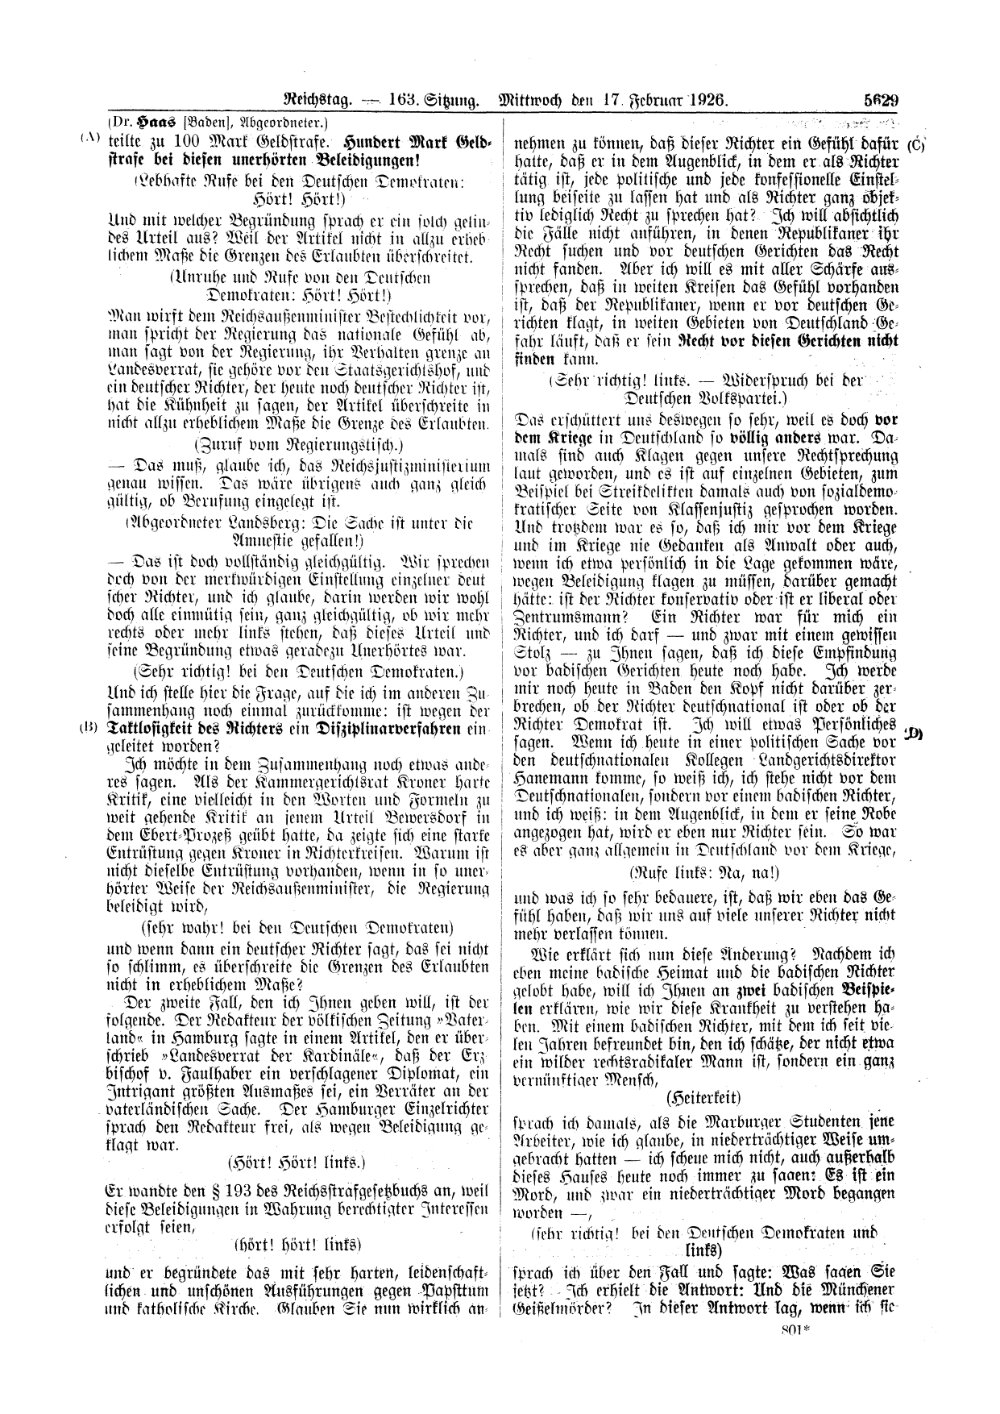 Scan of page 5629